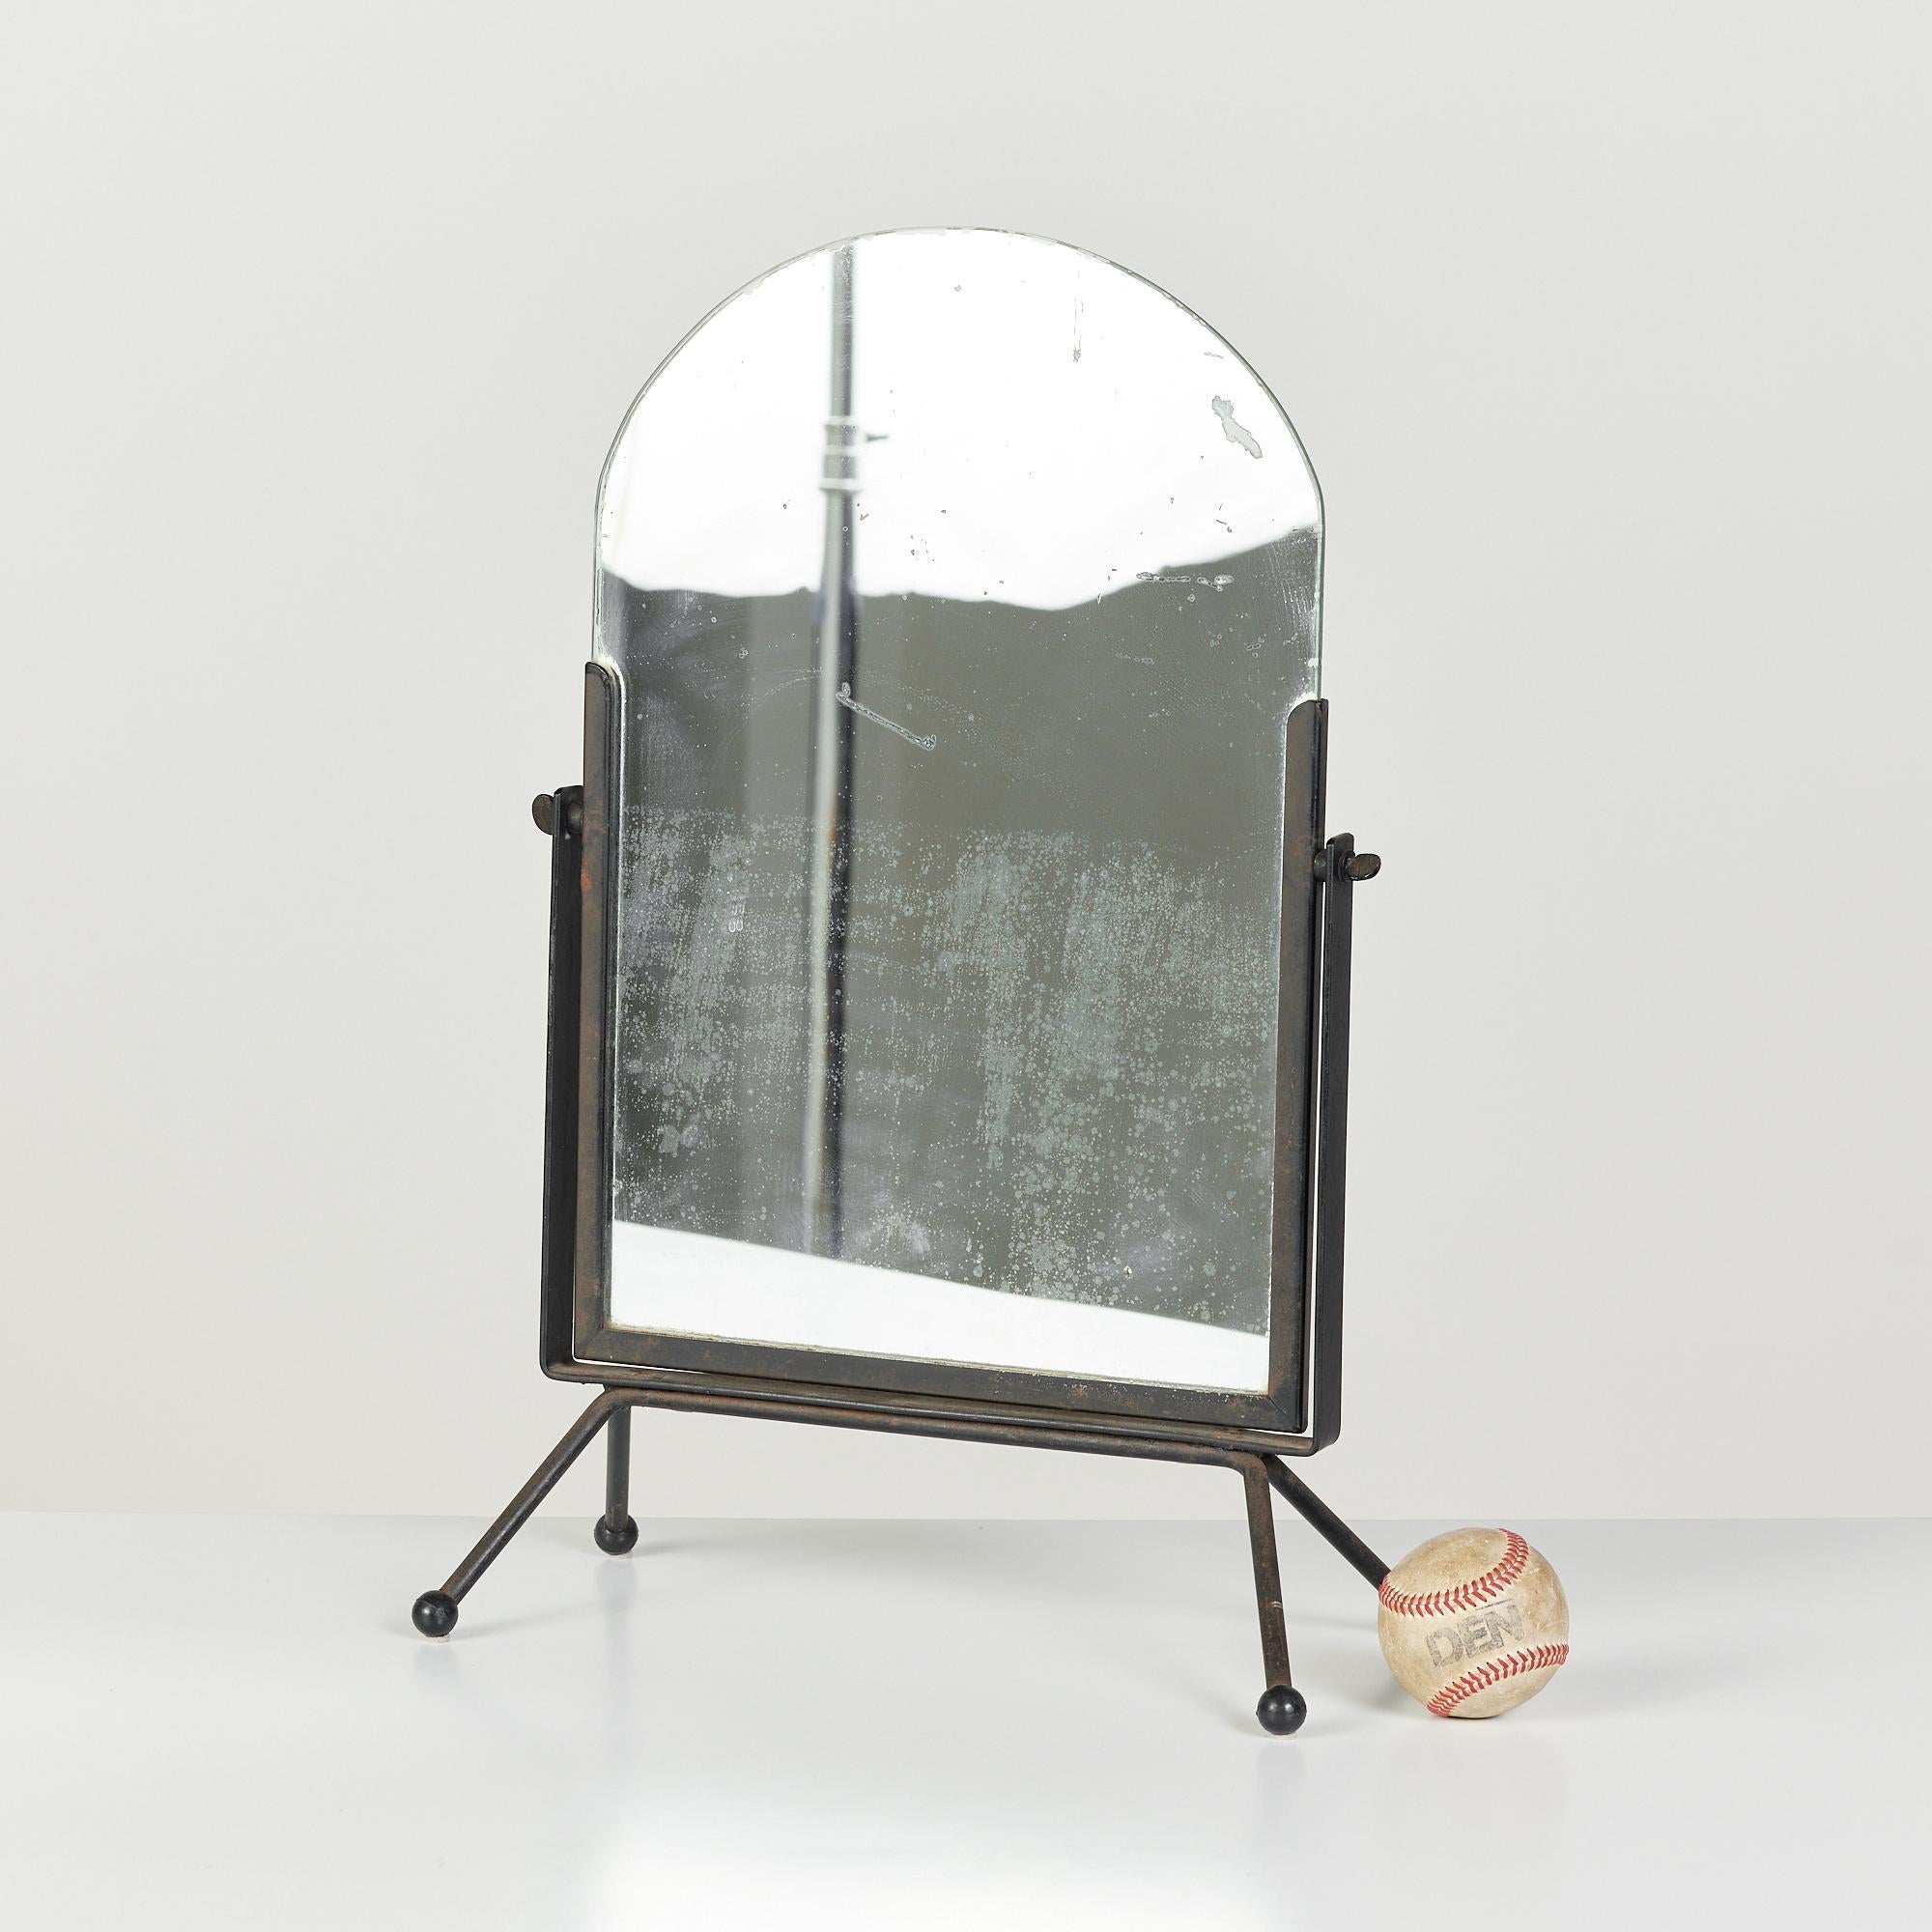 Iron vanity mirror features a curved piece of glass inset in an iron frame. The mirror is set in a swivel frame to adjust your angle and rests upon four splayed iron legs with ball feet.

Dimensions: 13.25